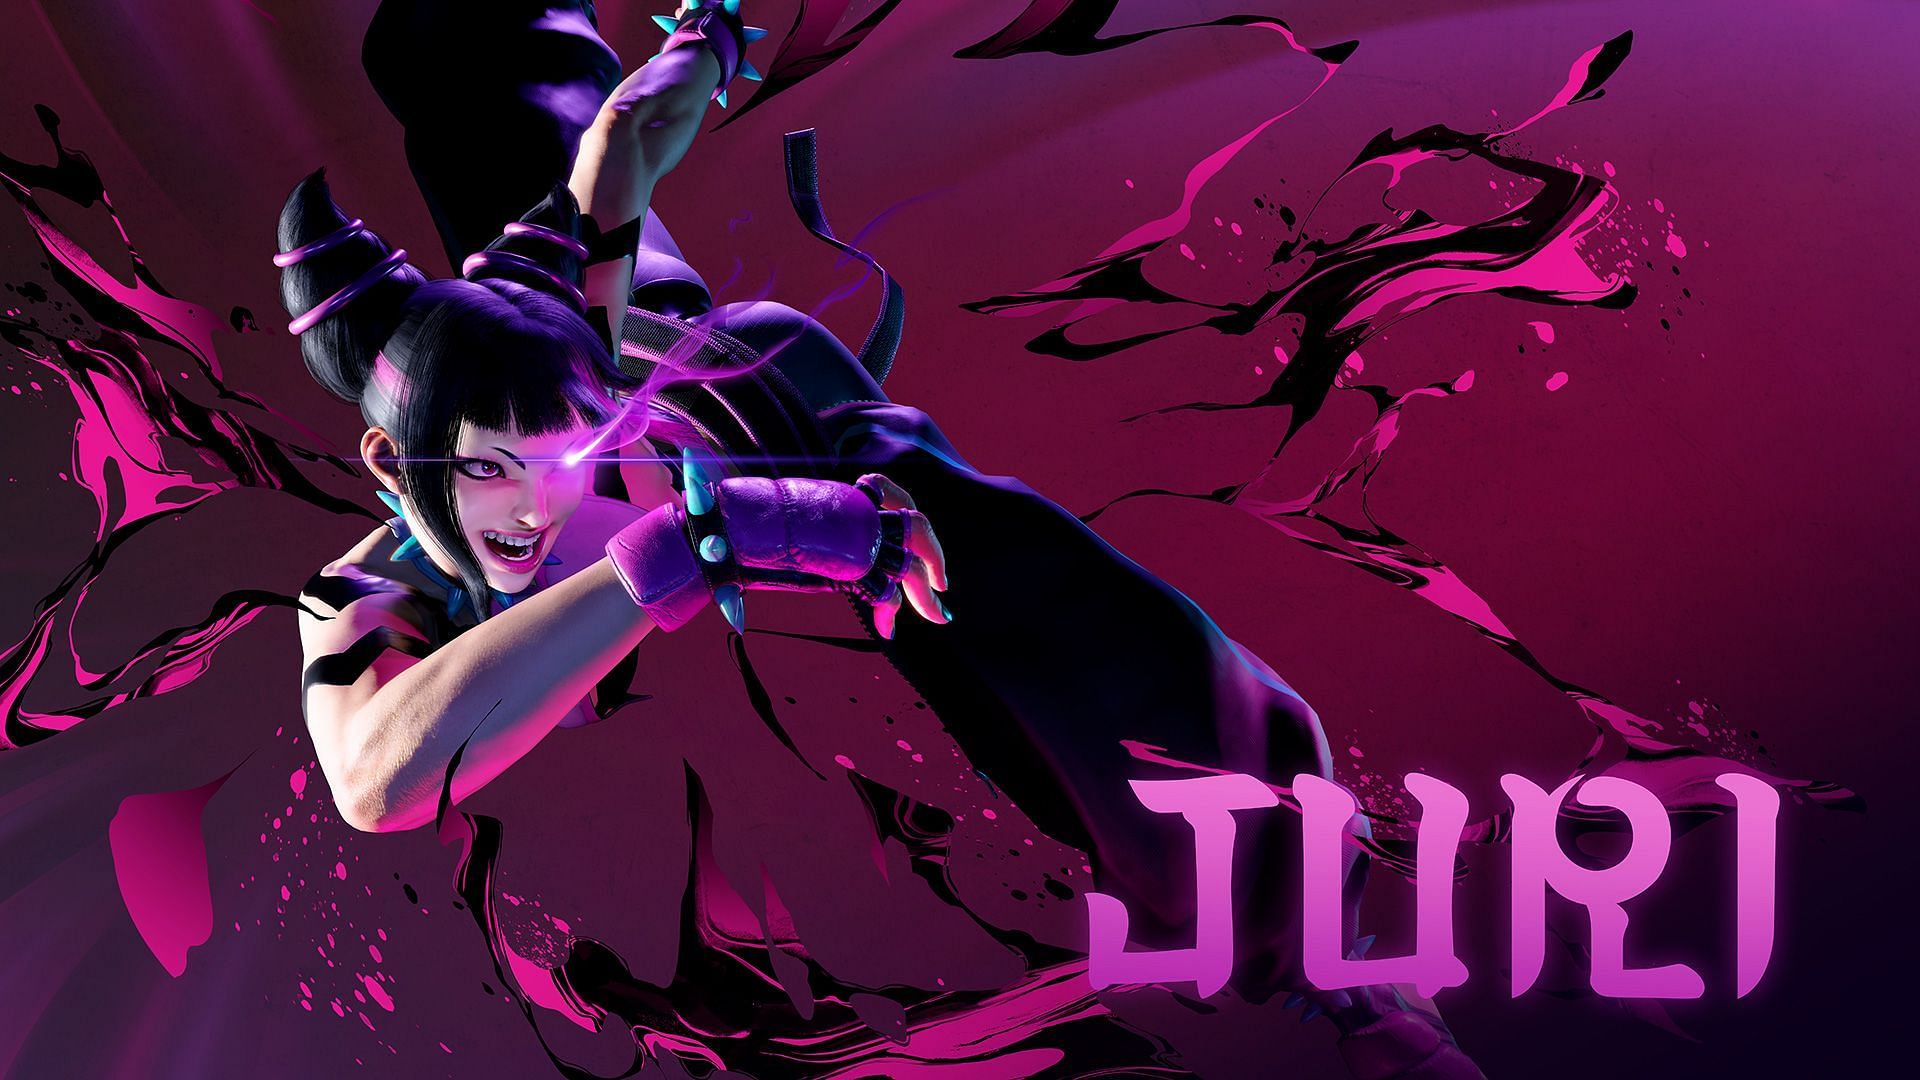 Juri is one of the characters in Street Fighter 6 (Image via Capcom)